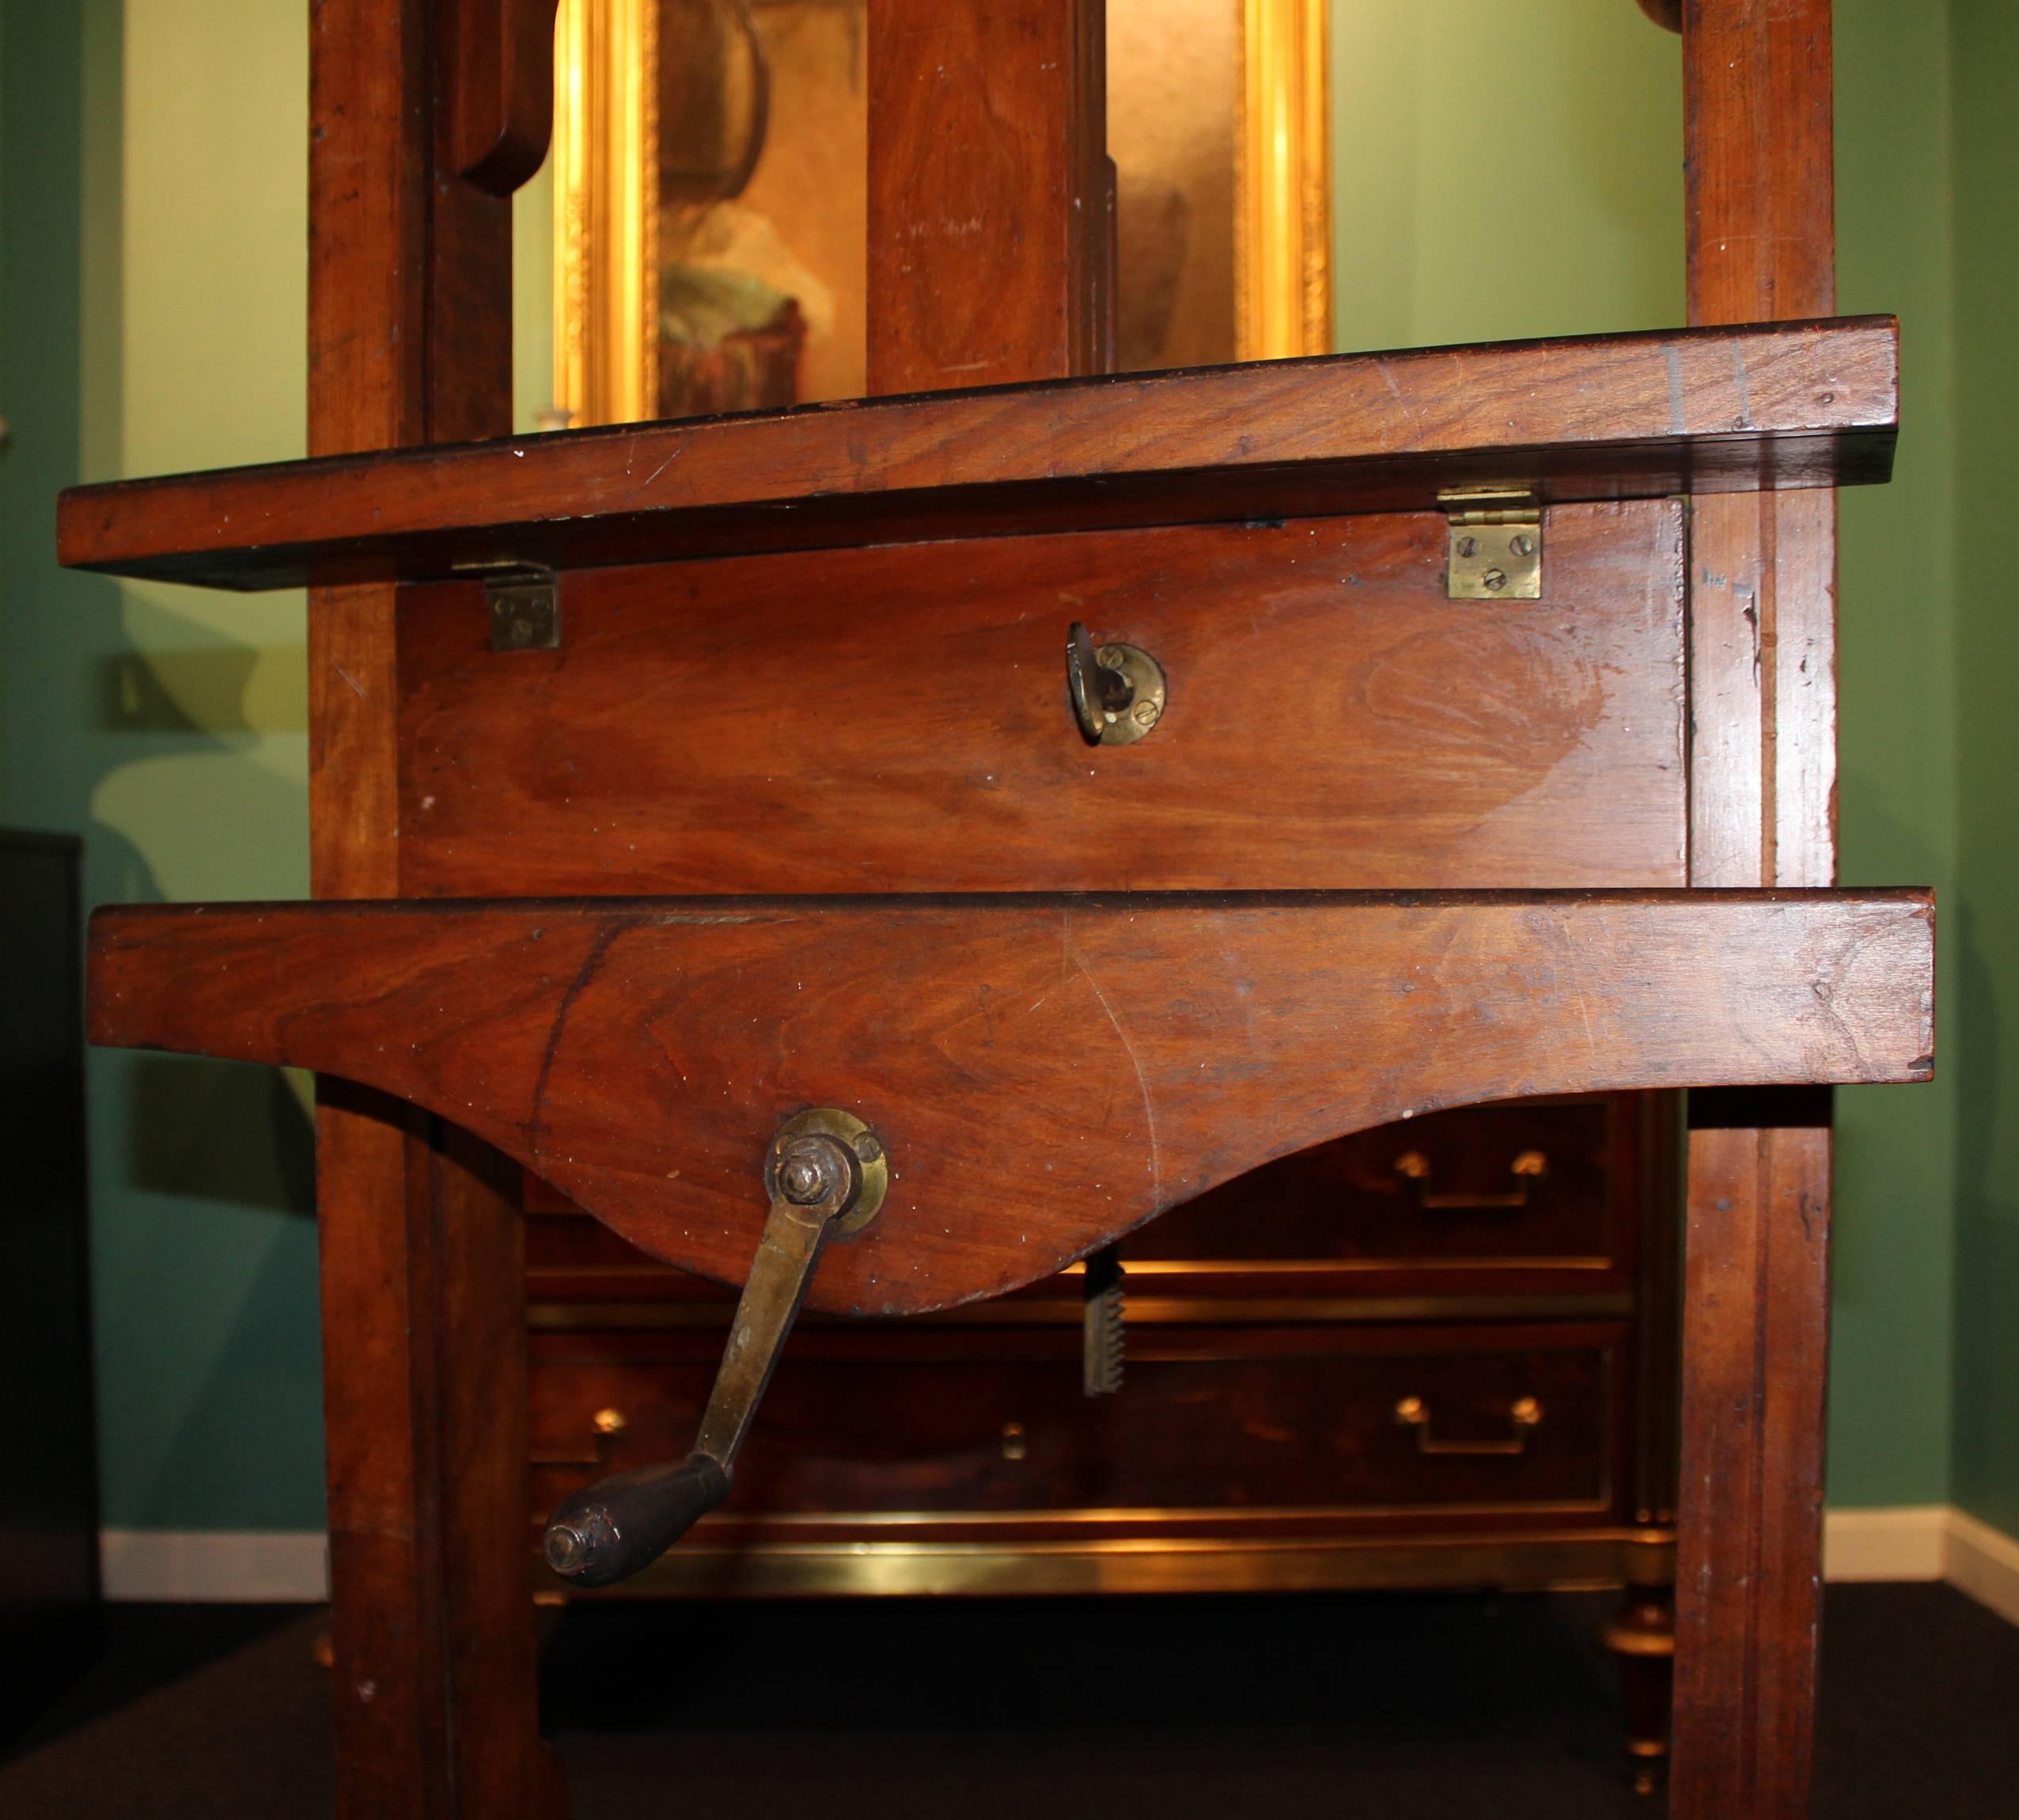 20th Century William McGregor Paxton's Artist Easel in Cherrywood from Fenway Studios, Boston